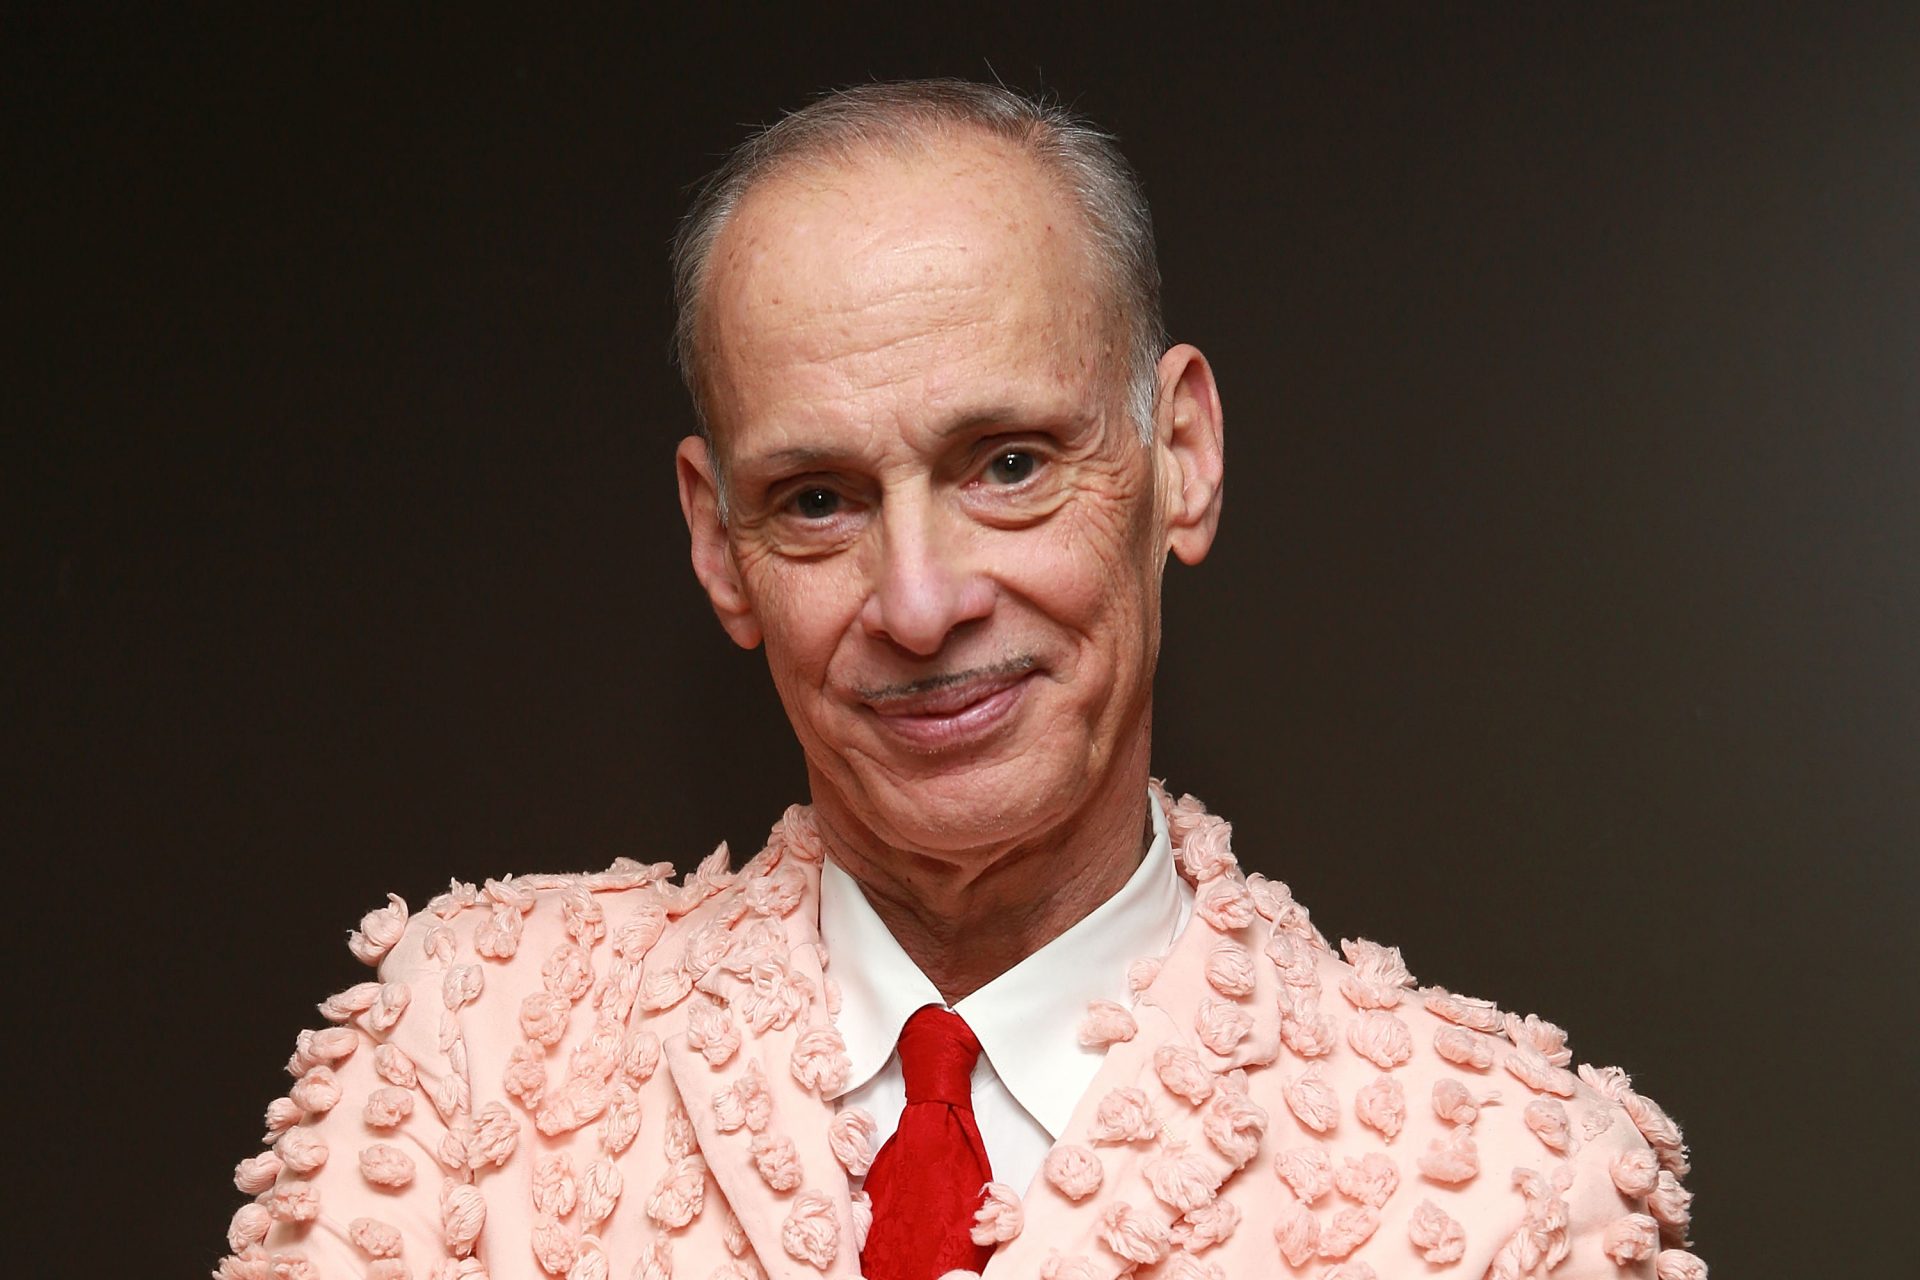 John Waters: The pope of trash